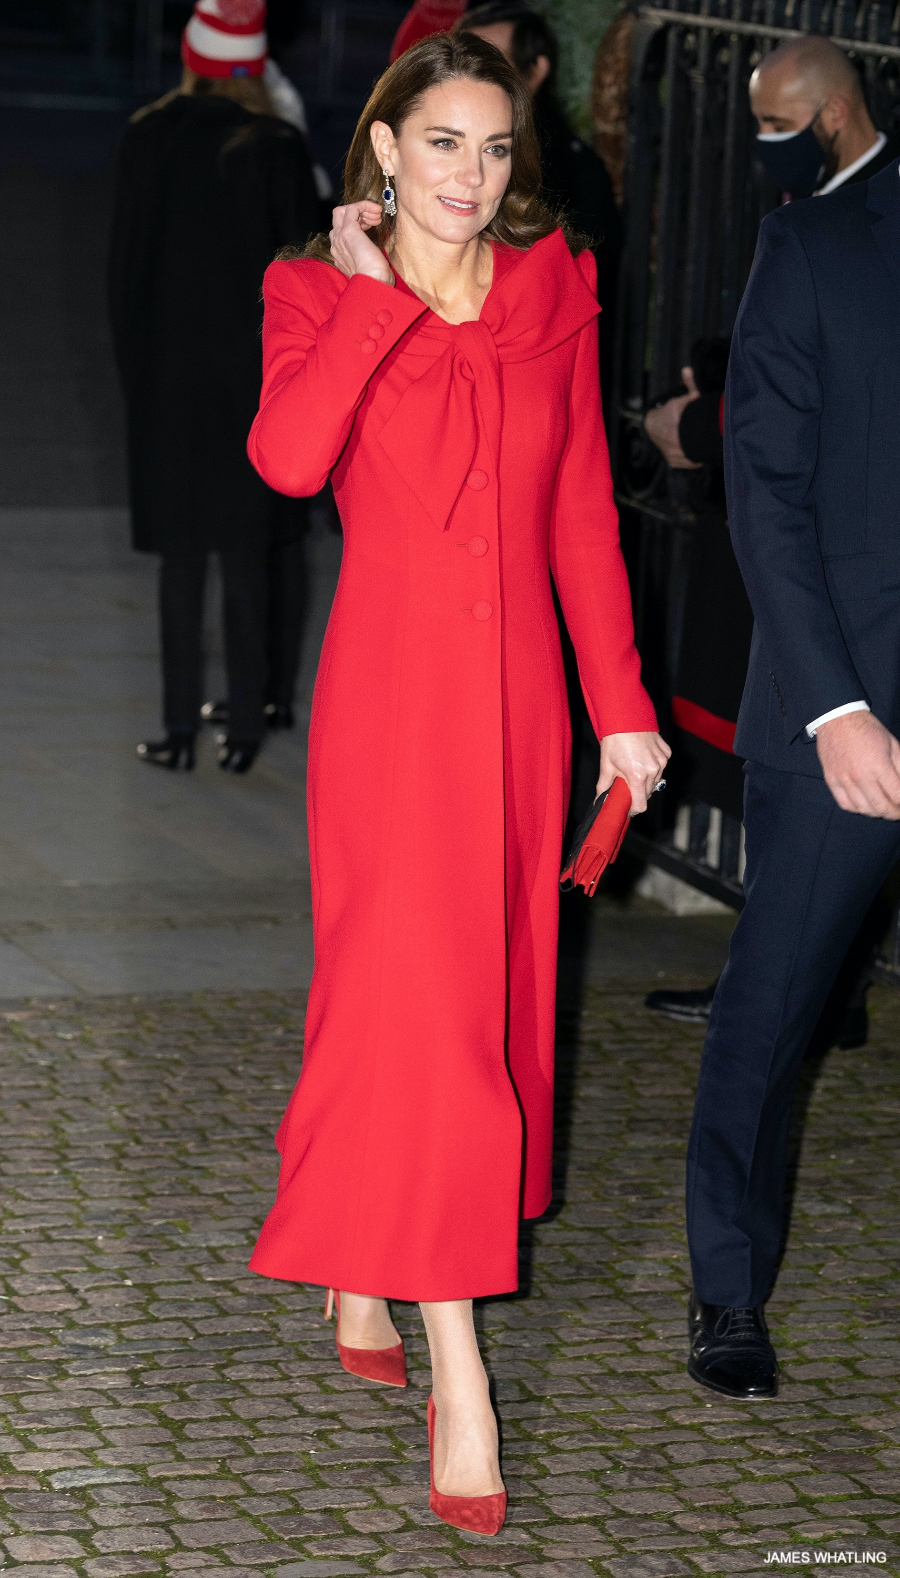 Kate Middleton, the Princess of Wales, wearing the Catherine Walker Beau Tie coat and red heels to her 'Together At Christmas' carol concert in 2021.